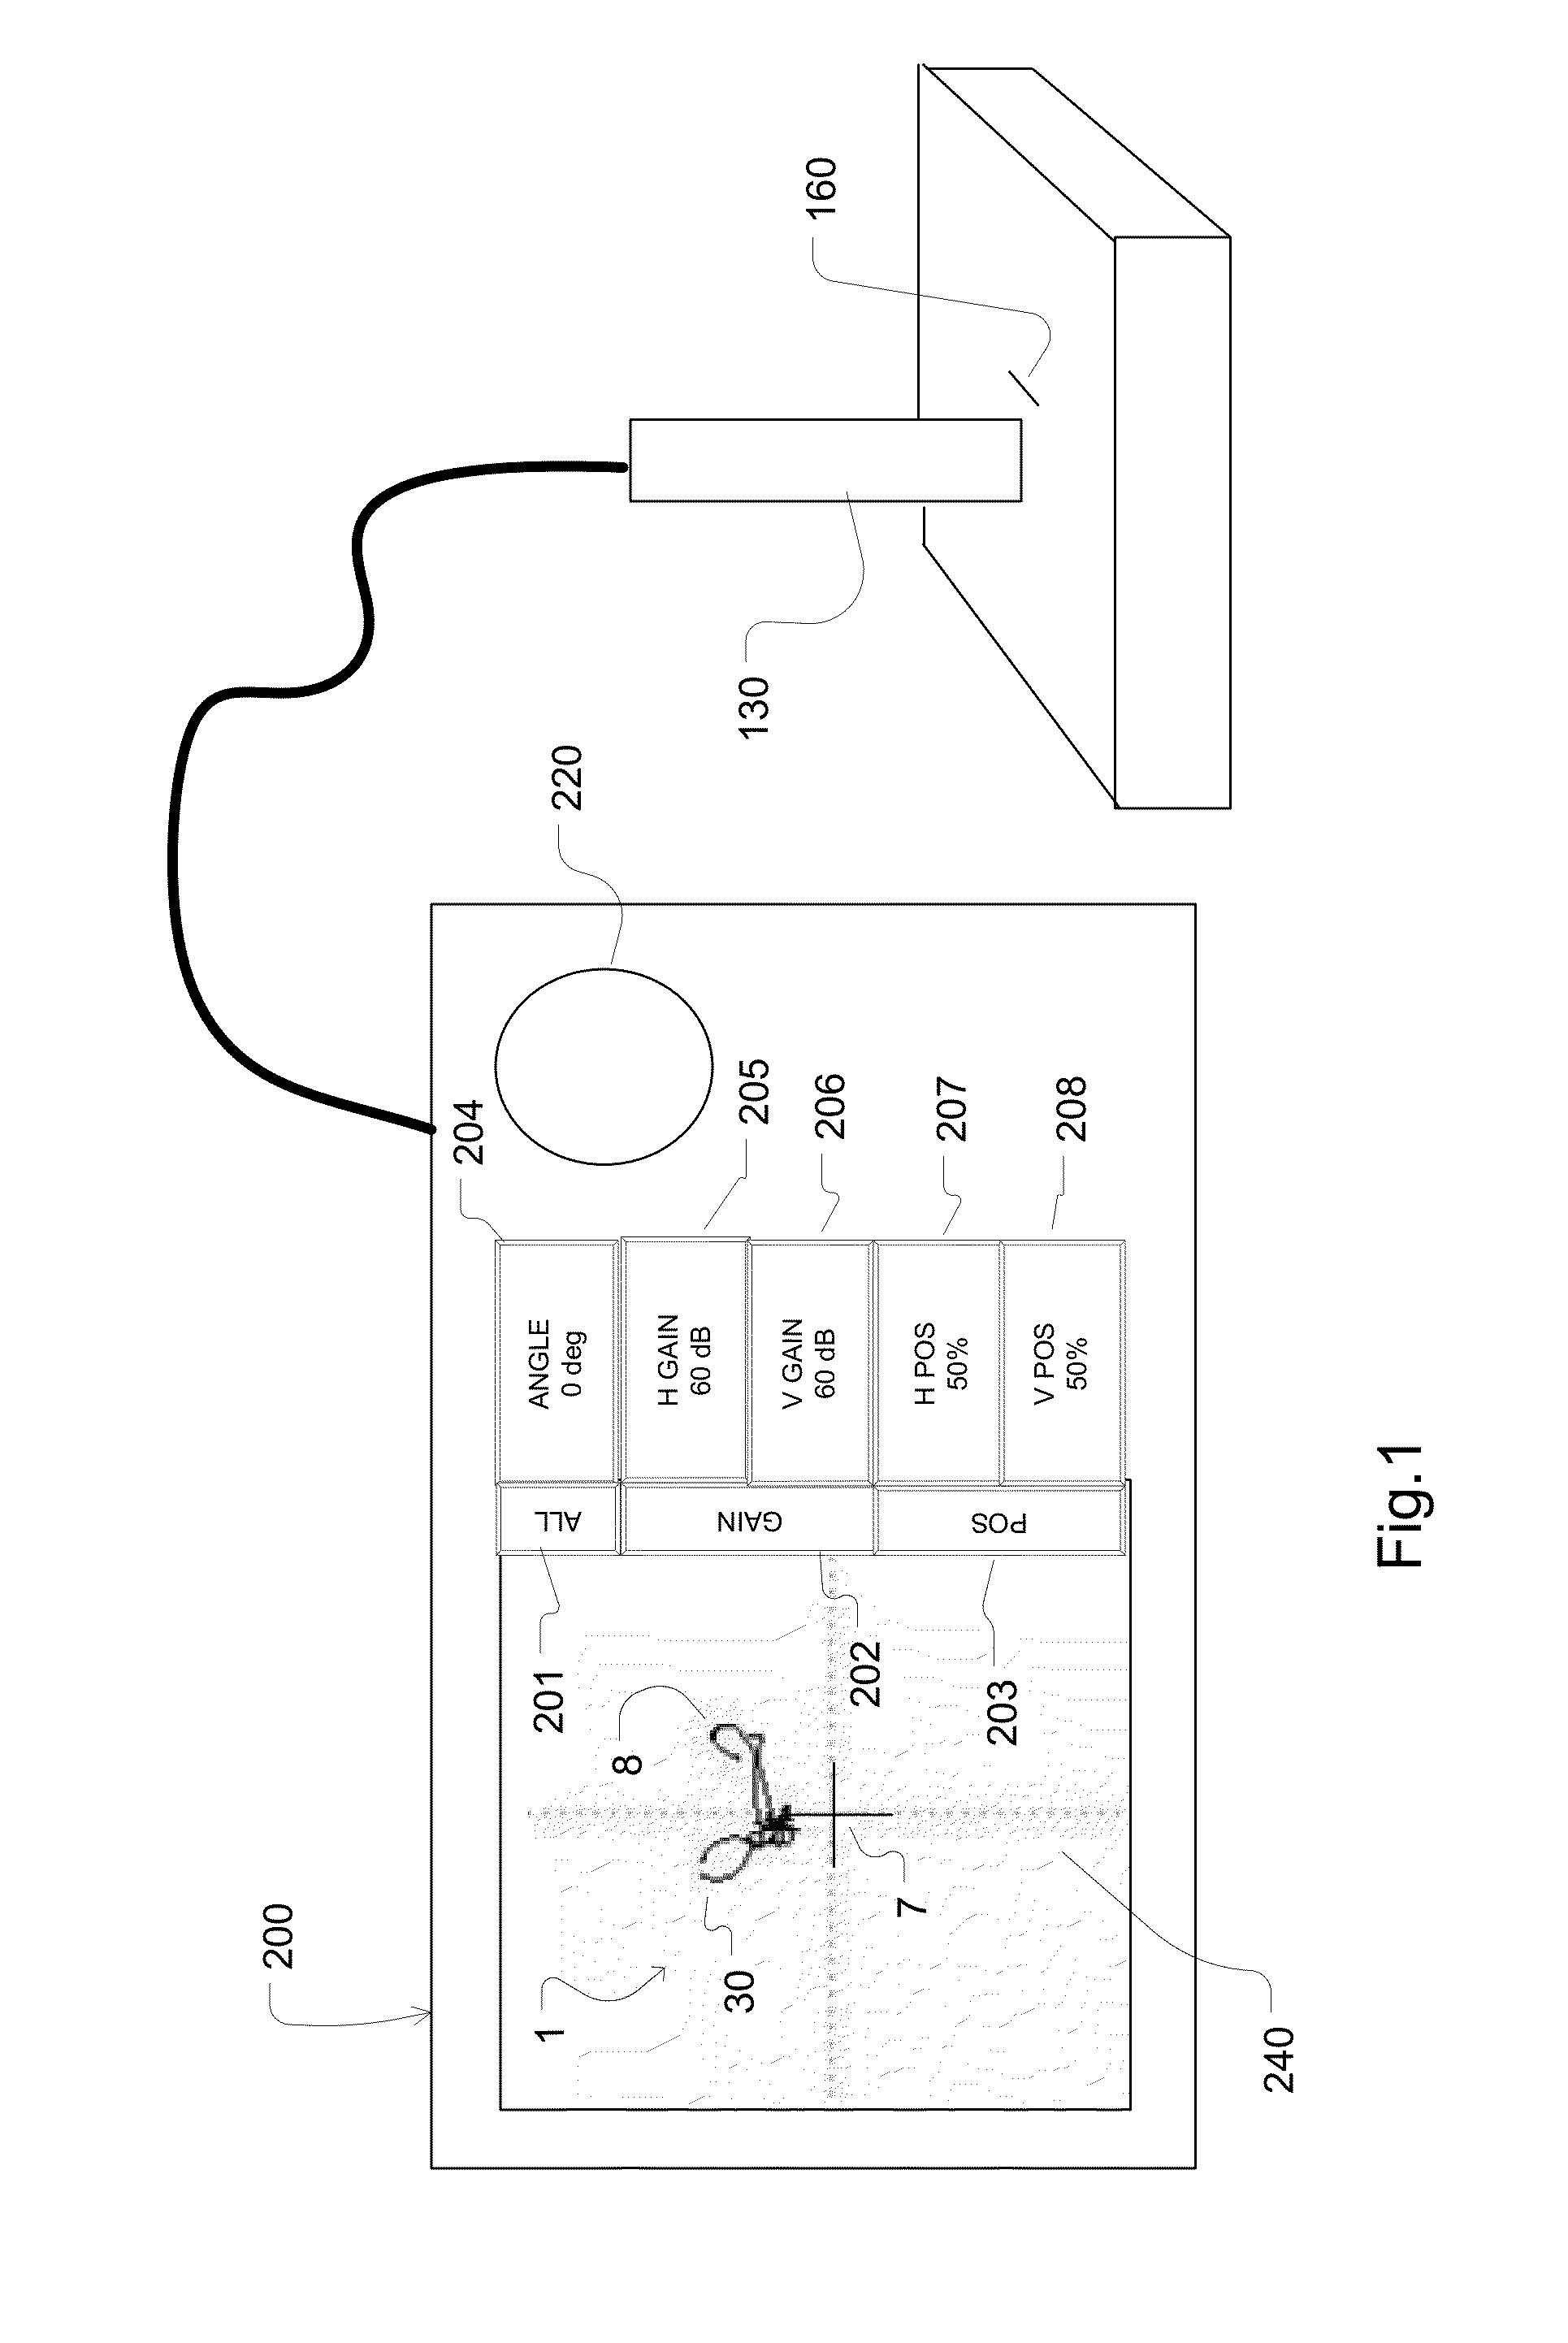 Method of manipulating impedance plane with a multi-point touch on touch screen